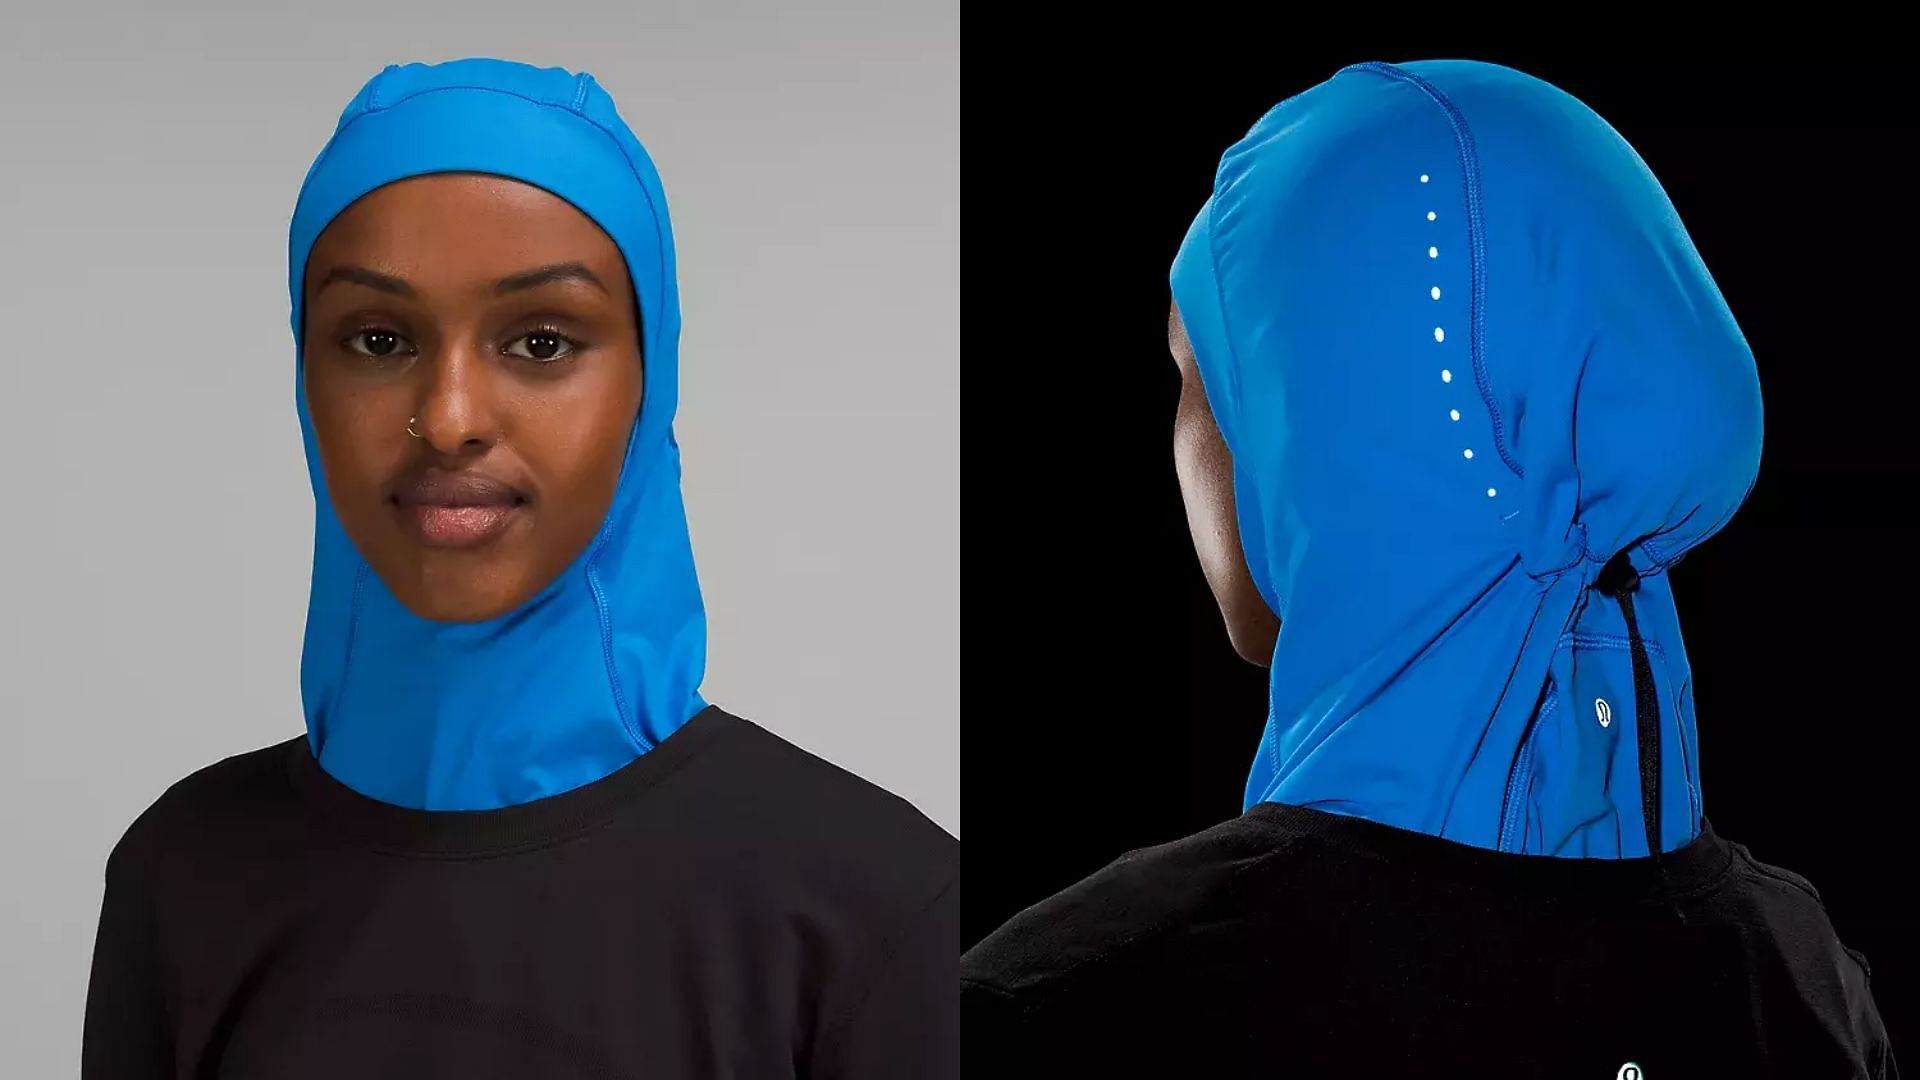 Recently launched Lightweight Performance Hijabs (Image via Lululemon)